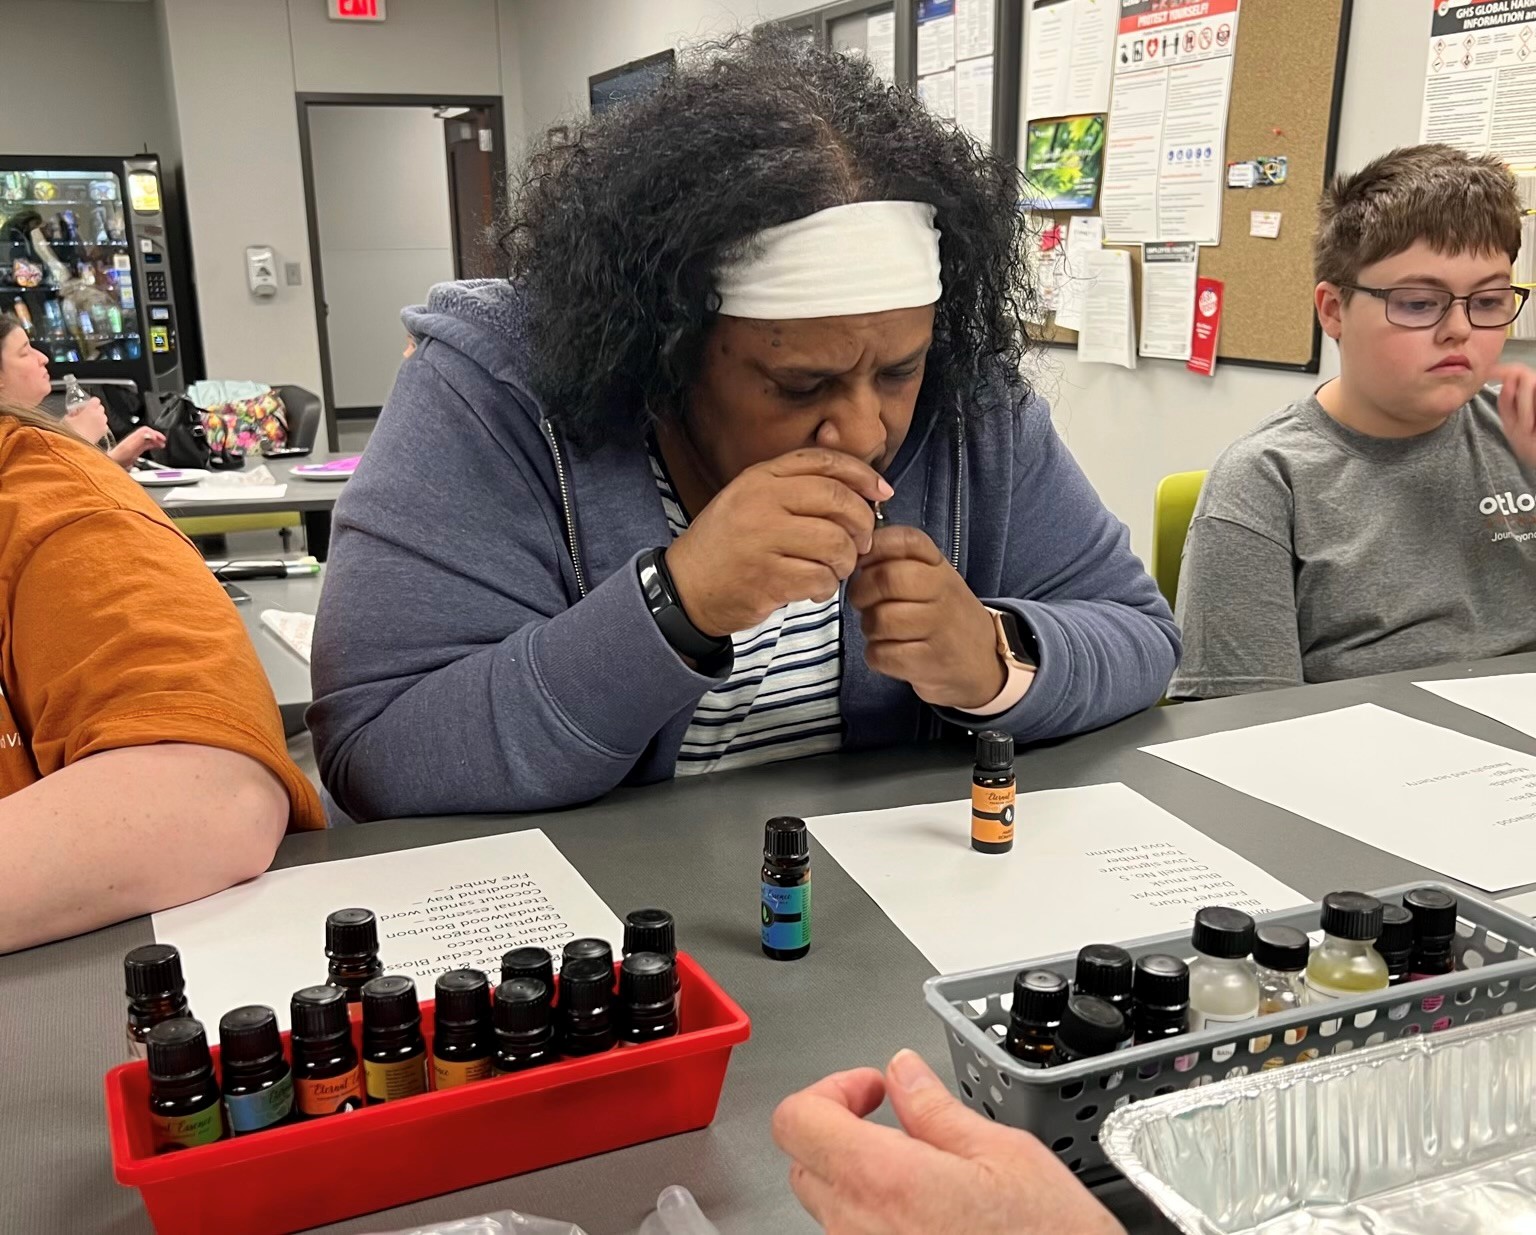 A black woman standing at a table filled with scented oils. Her head is bent down and her nose is near the scented oil bottle she is holding up.